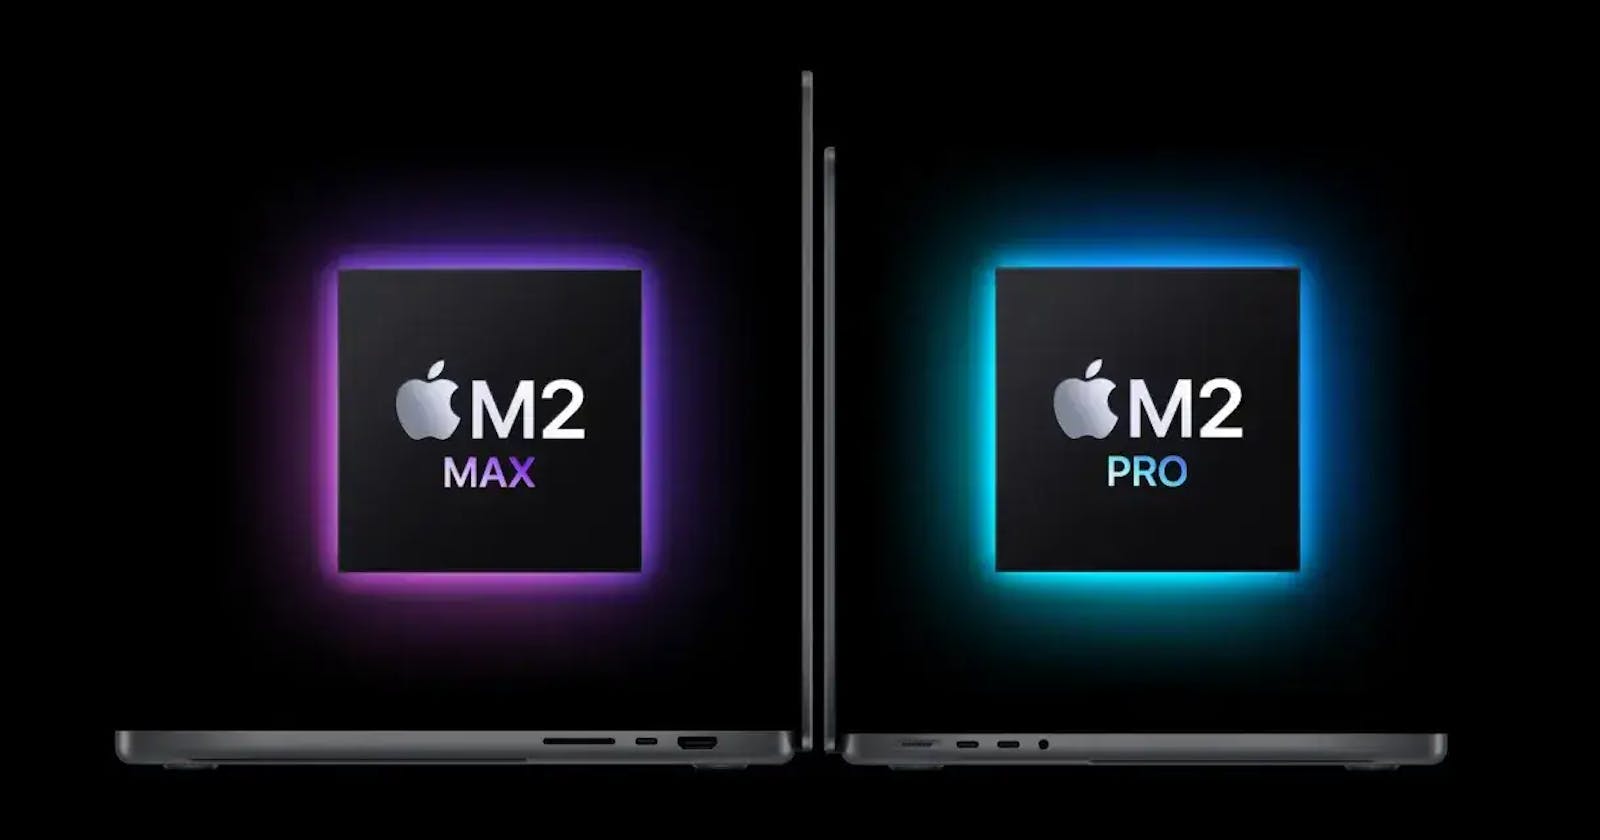 Performance of Apple M2 Pro and M2 Max Chips Revealed